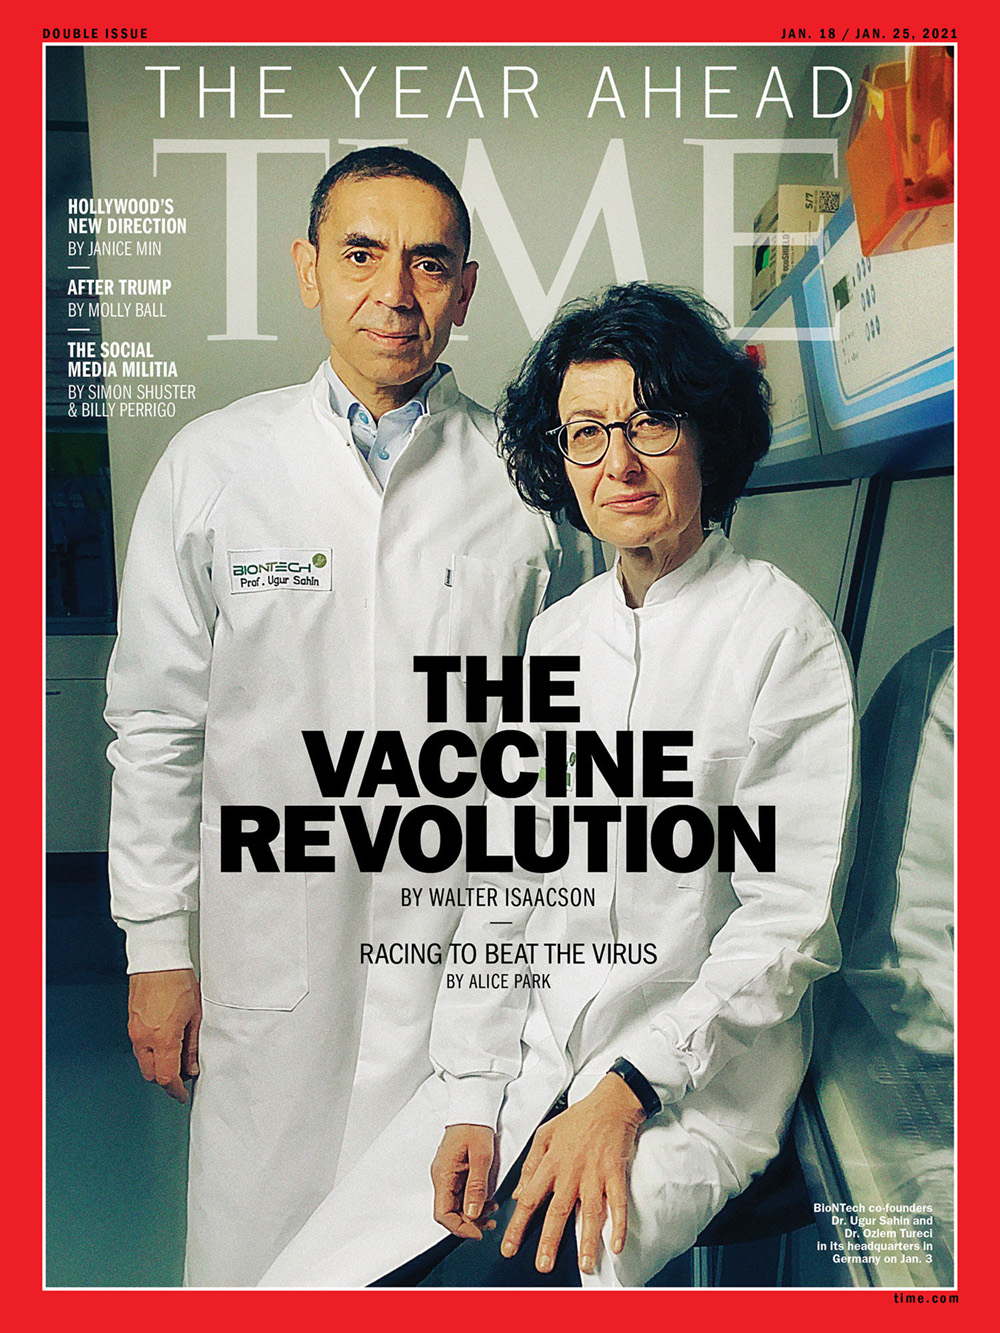 Dina Litovsky’s Powerful Virtual Portraits Landed Her on the Cover of TIME